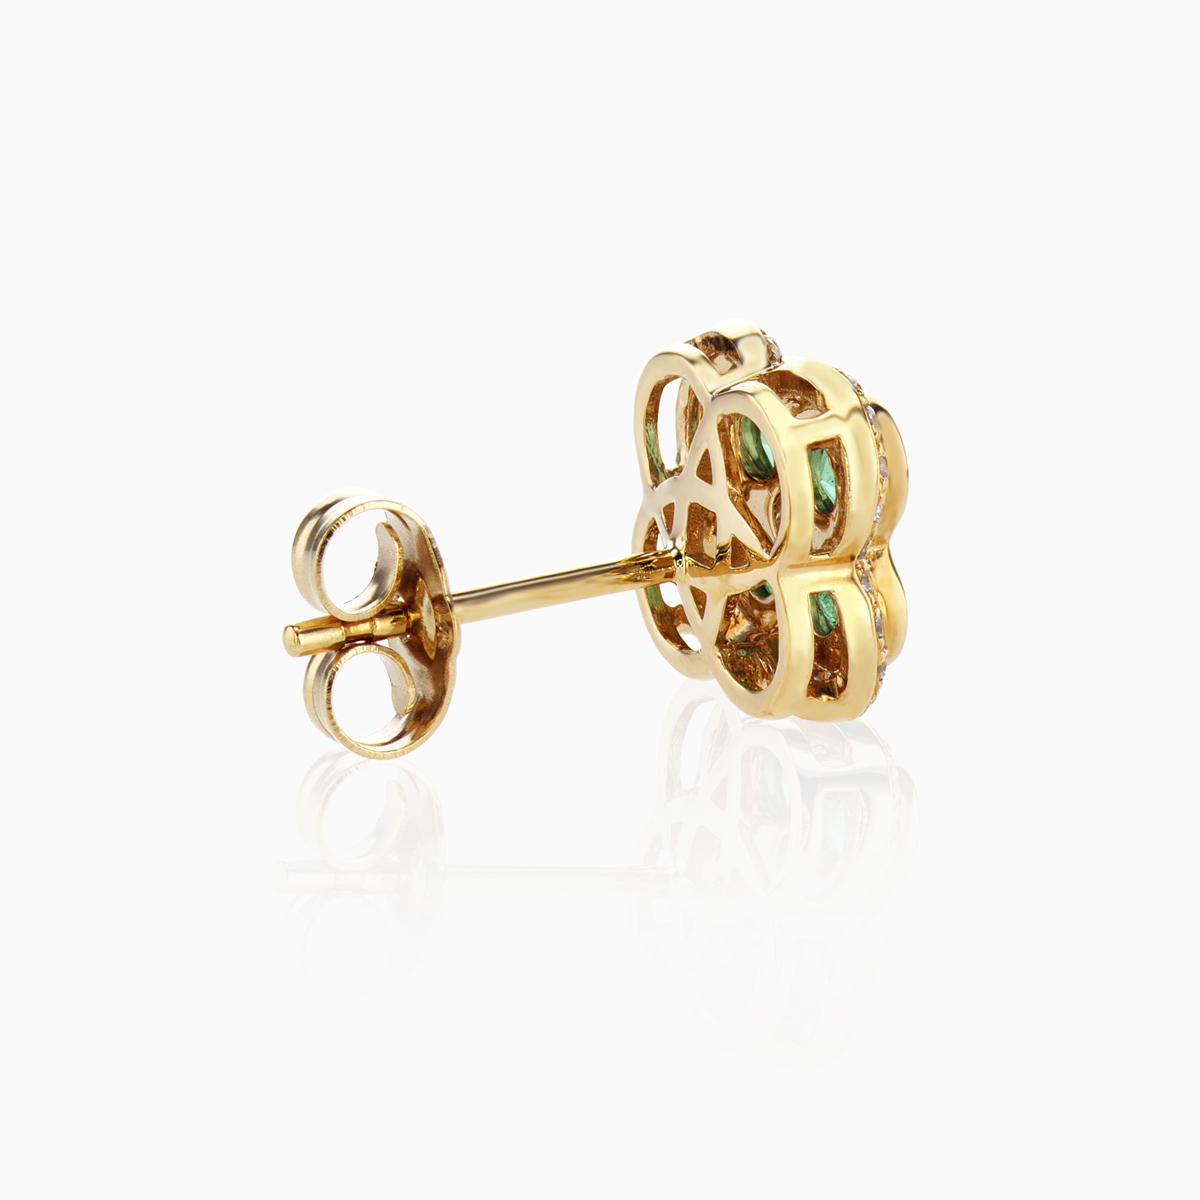 Natural Emerald and Diamond Floral Stud Earrings, 14k Yellow Gold